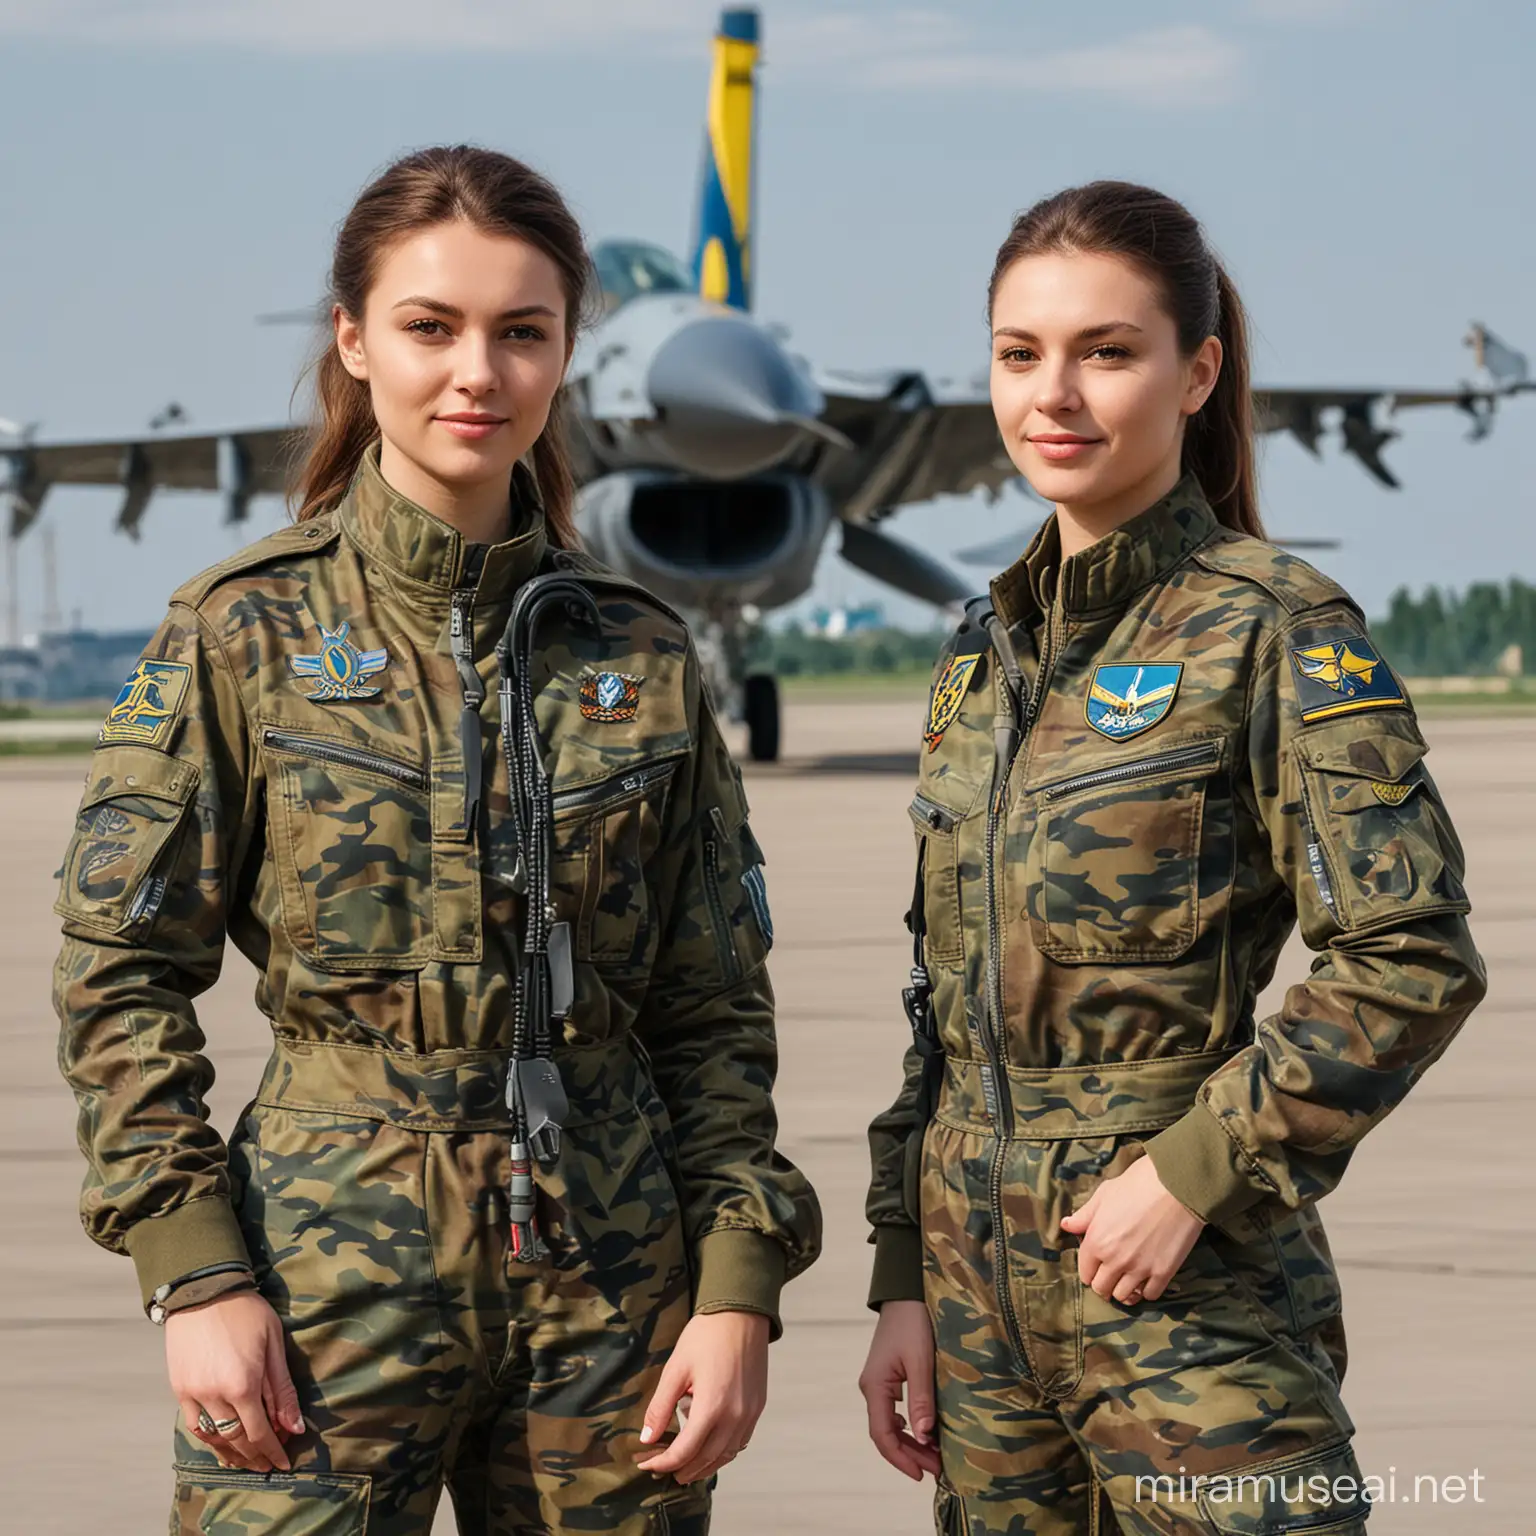 Female Pilot and Ukrainian Pilot in Camouflage Uniform with F16 Aircraft